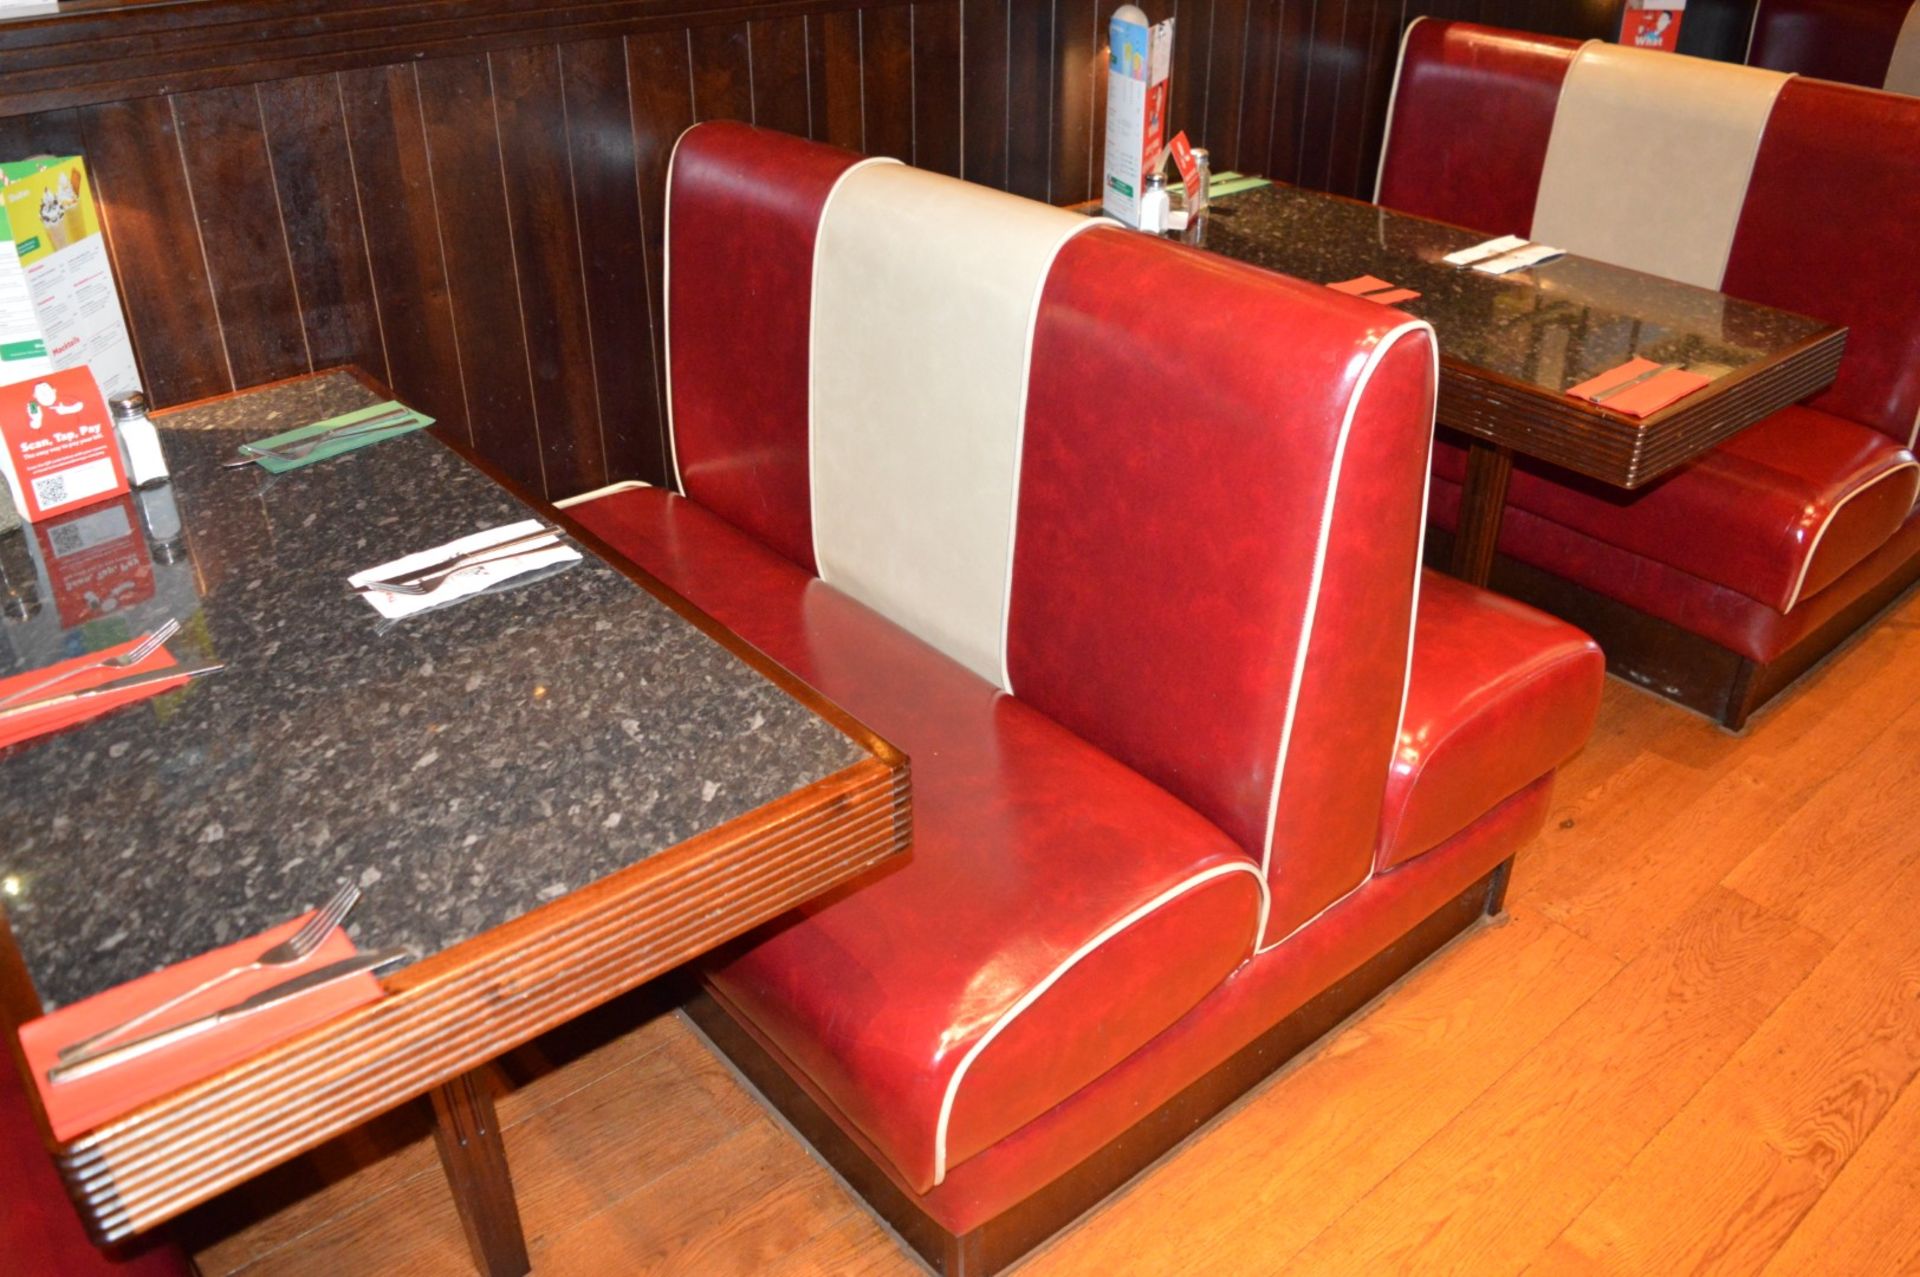 1 x Selection of Seating Booths in a 1950's Retro American Diner Design Supplied in Good Condition - - Image 4 of 7